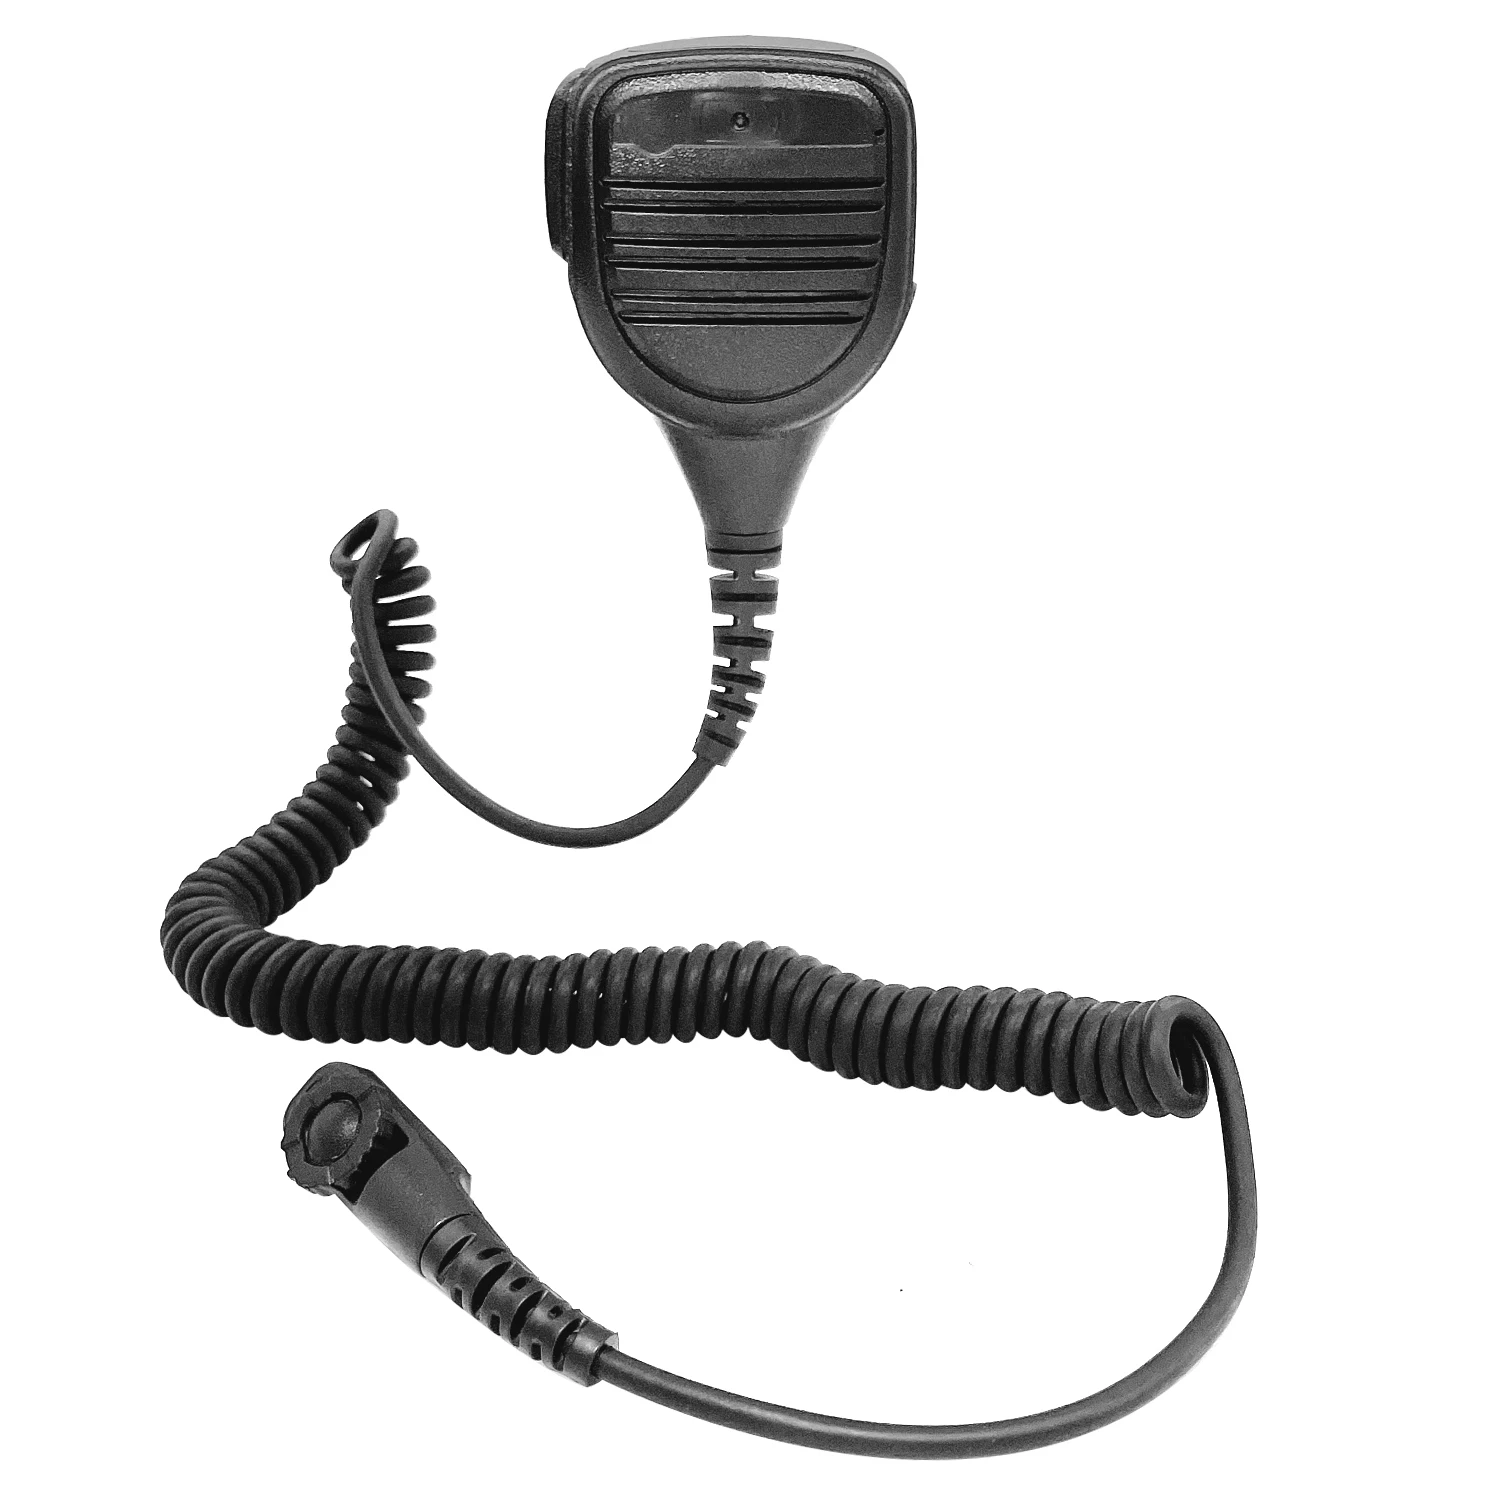 Remote Waterproof Speaker Microphone Mic, PTT for Hytera PD580, PD700, PD700G, PD702, PD702G, Walkie Talkie, Two Way Radio ppt mic speaker microphone for hytera radio pd700 pd700g pd780 pd780g pt580 pt580h walkie talkie